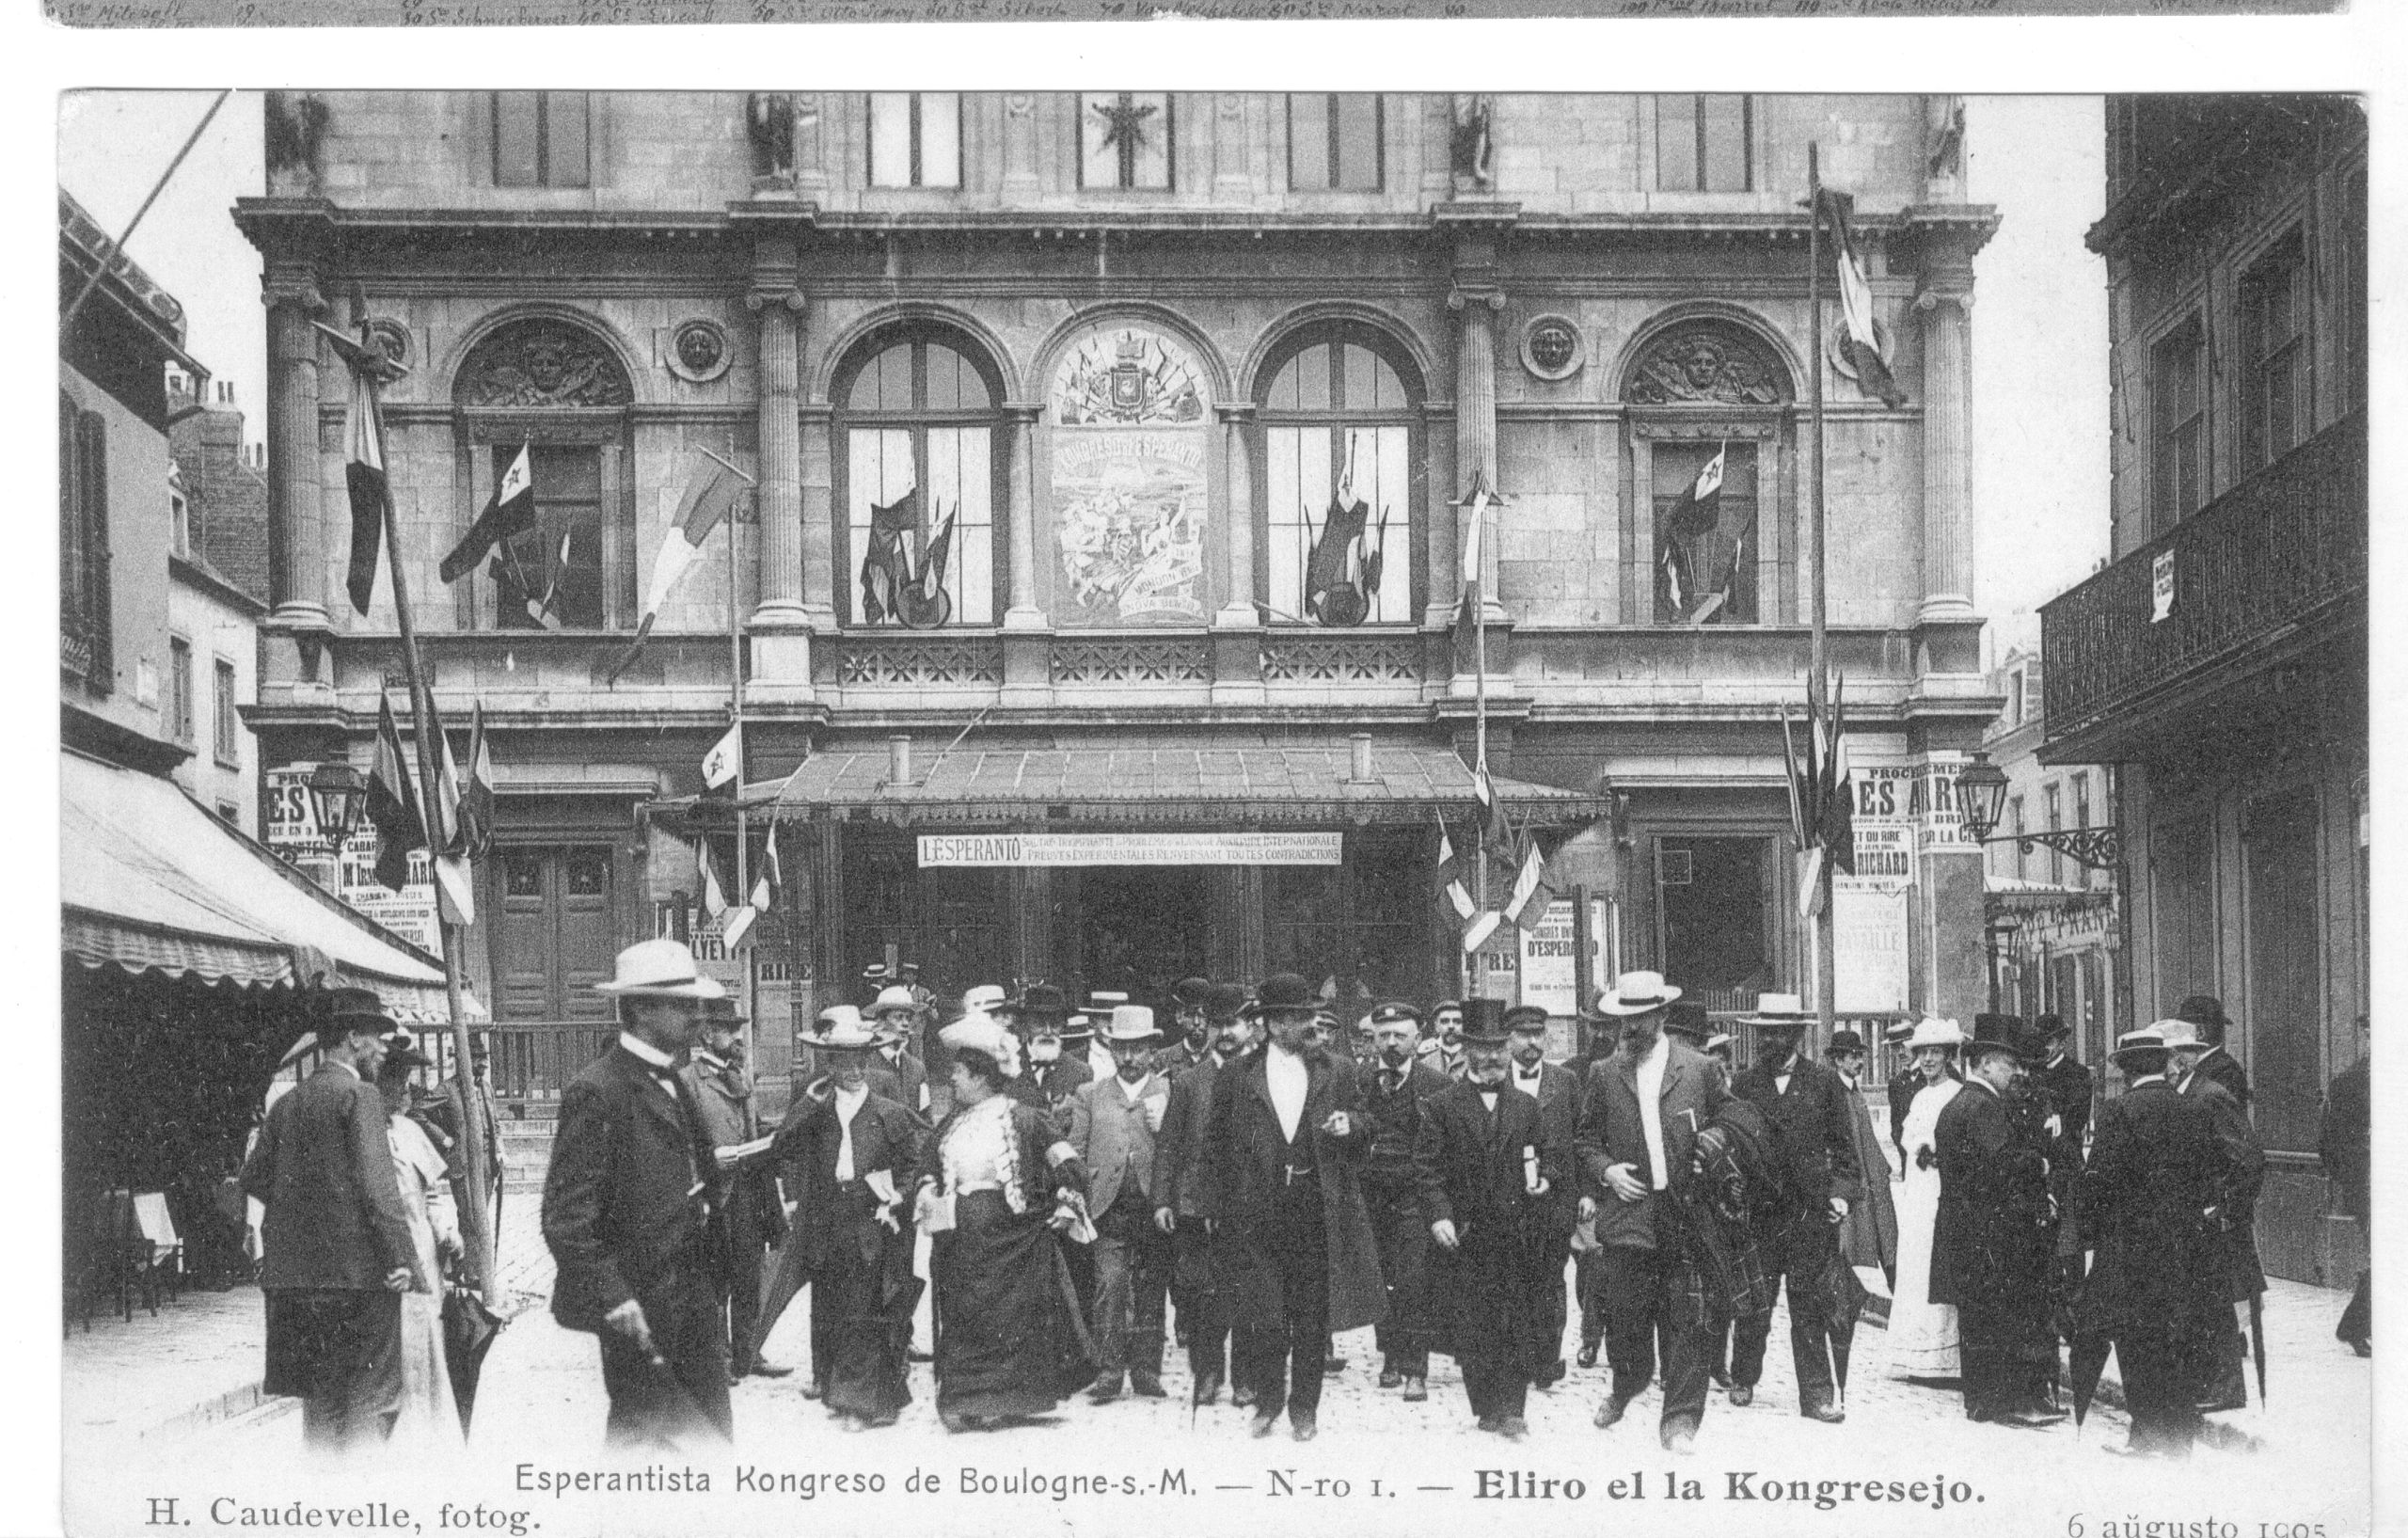 a group of men standing in front of a building.